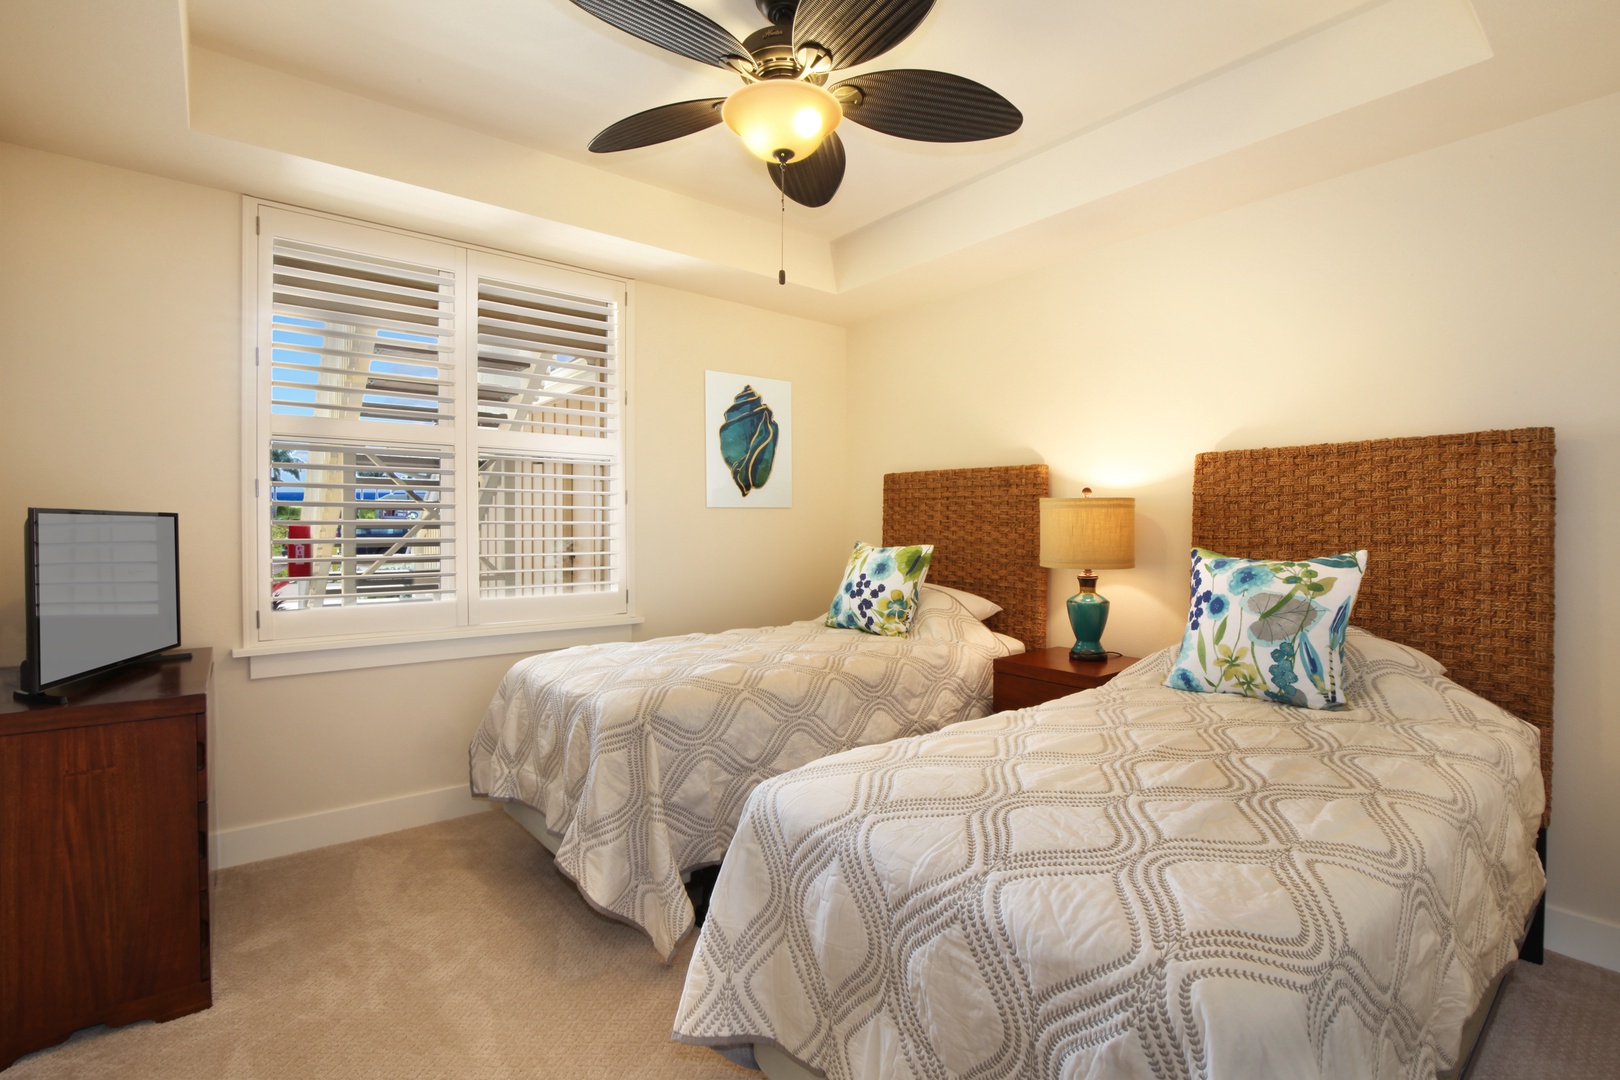 Koloa Vacation Rentals, Pili Mai 7M - Guest bedroom with twin beds